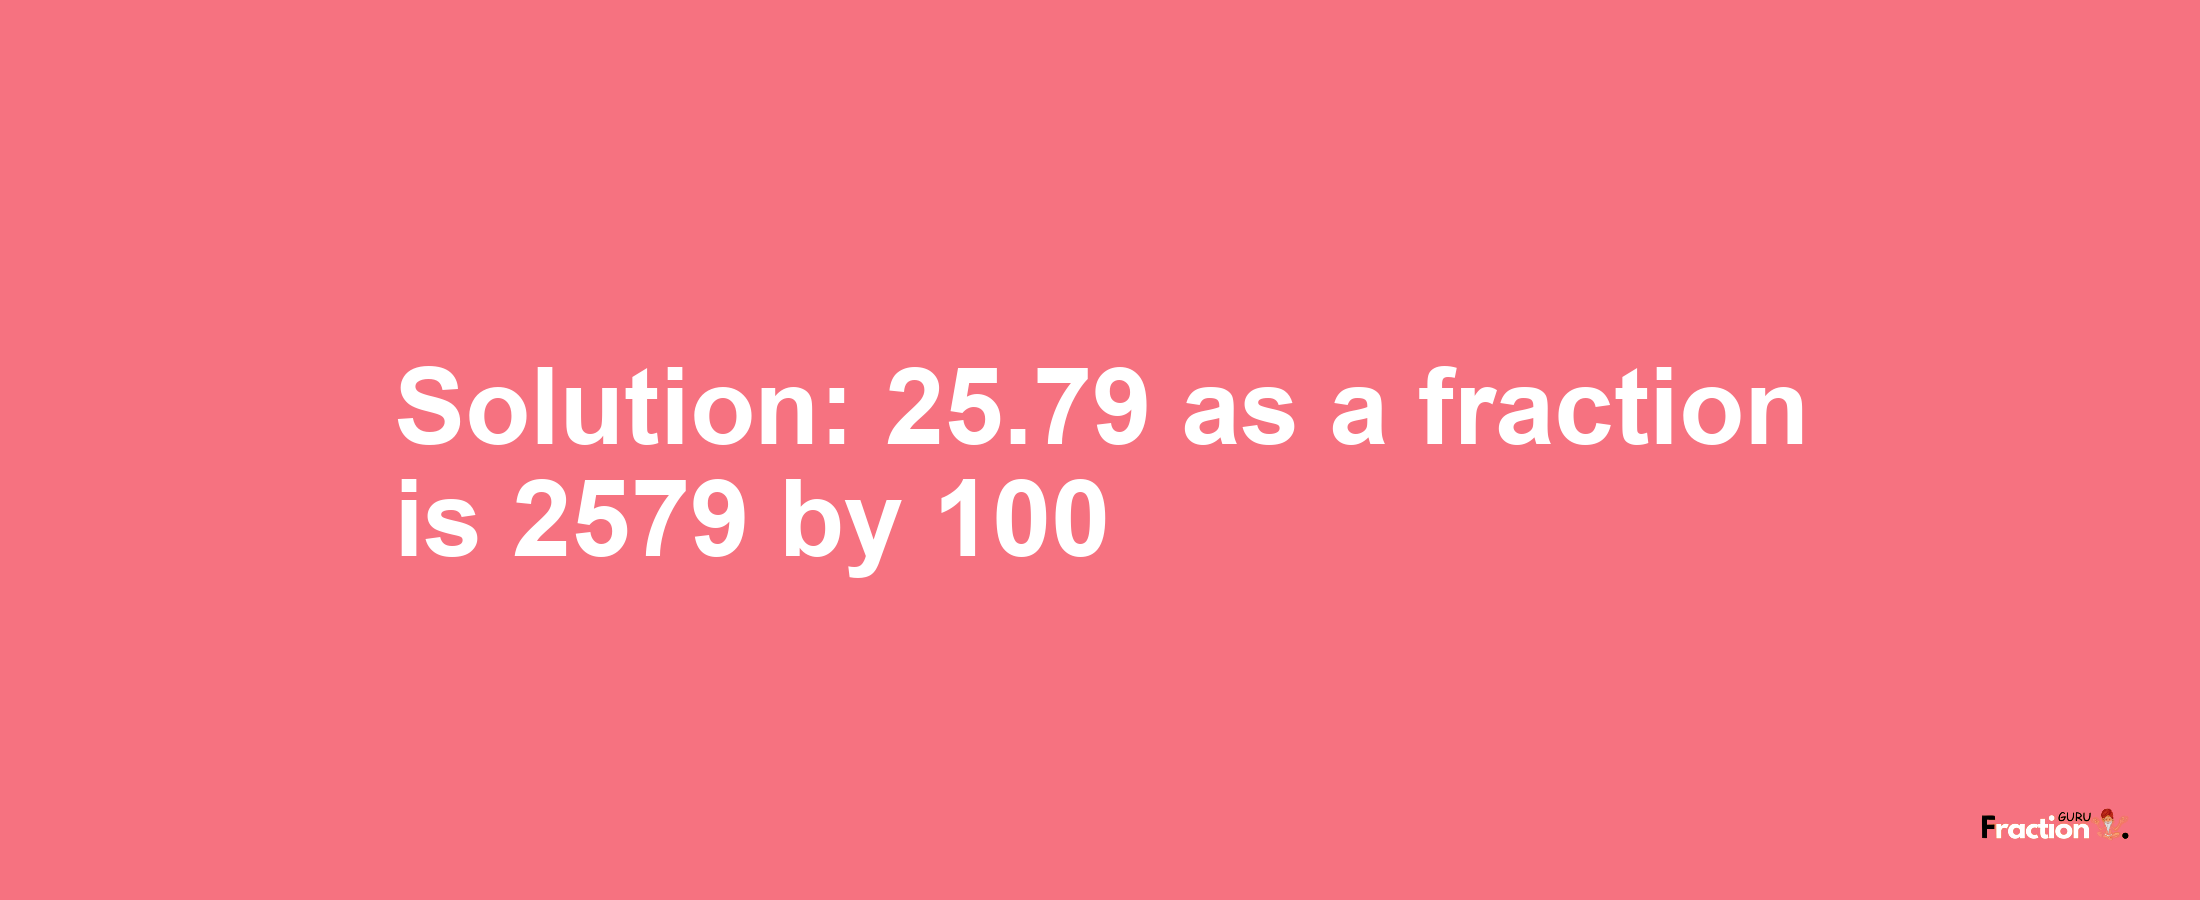 Solution:25.79 as a fraction is 2579/100